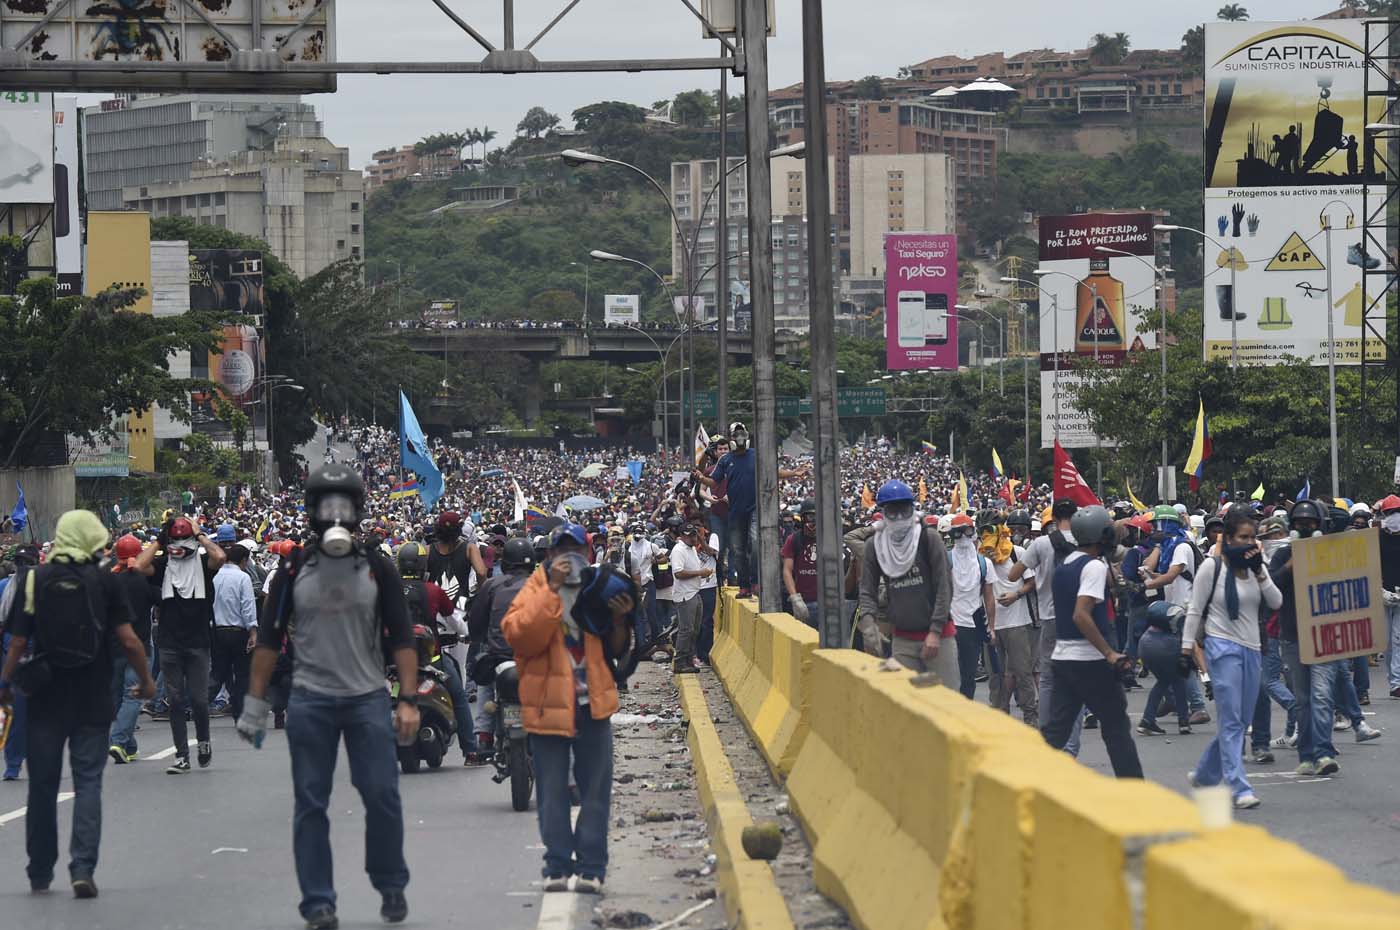 Demonstrators march along a major highway of Caracas during a protest against Venezuelan President Nicolas Maduro, on May 3, 2017. Venezuela's angry opposition rallied Wednesday vowing huge street protests against President Nicolas Maduro's plan to rewrite the constitution and accusing him of dodging elections to cling to power despite deadly unrest. / AFP PHOTO / JUAN BARRETO